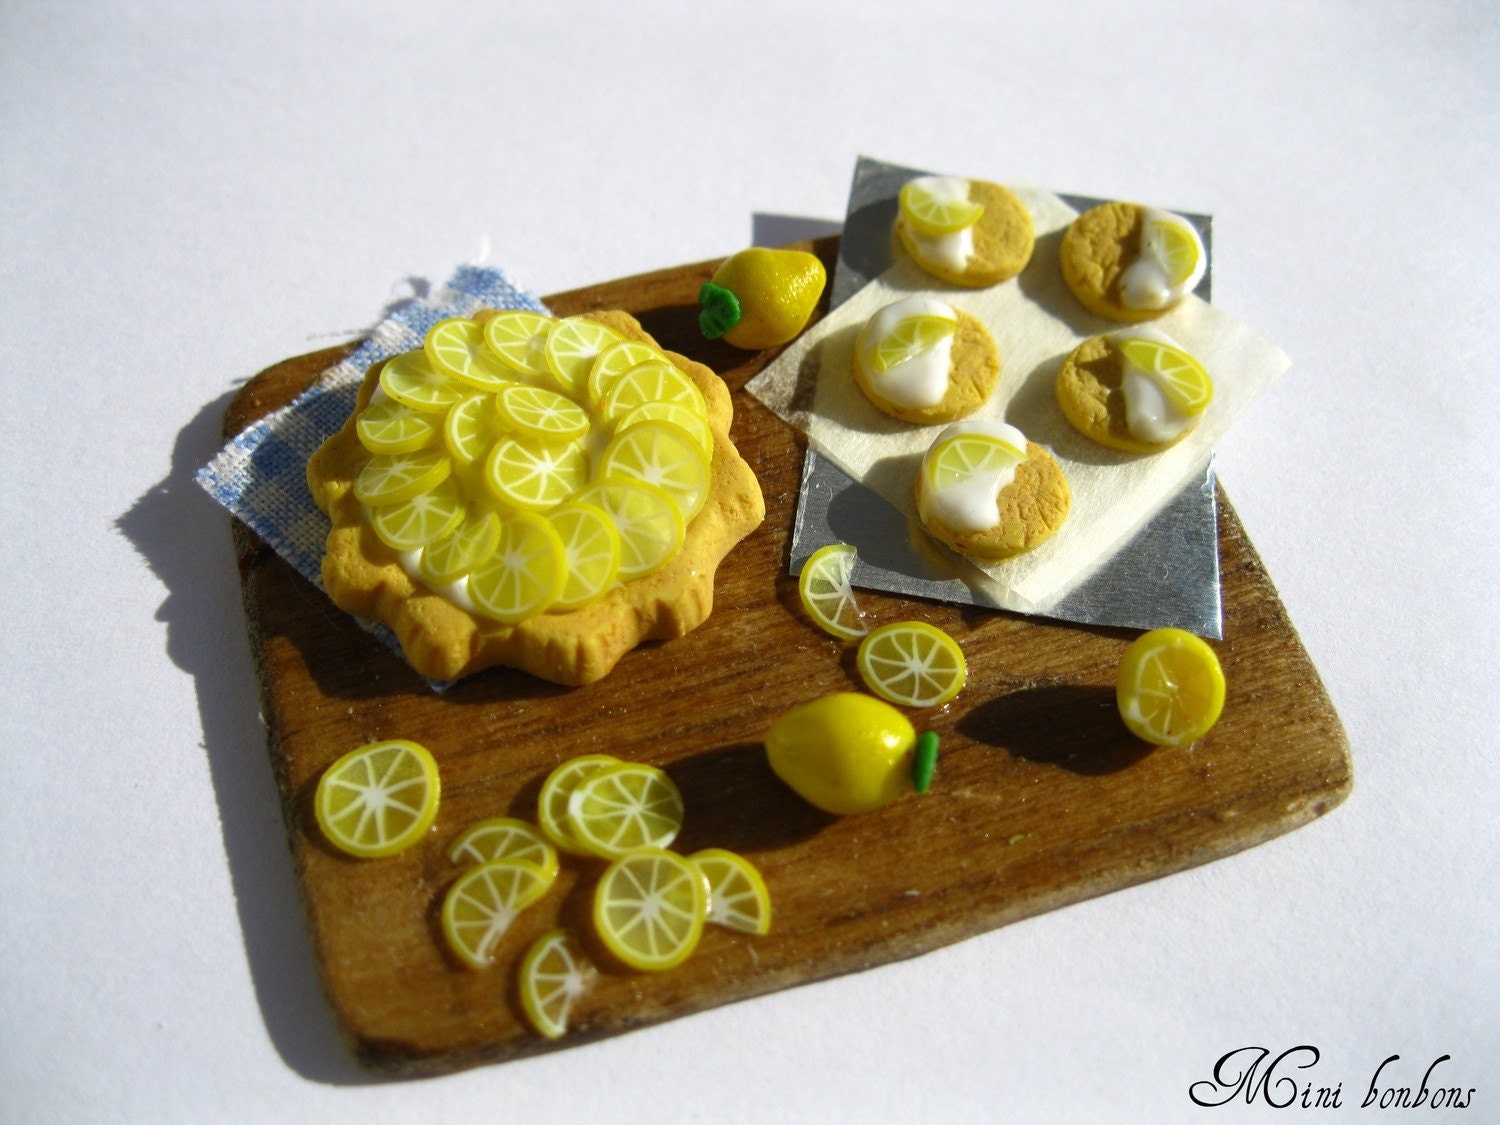 Lemon tart and cookies - Dollhouse preparation board -  - 12 th scale